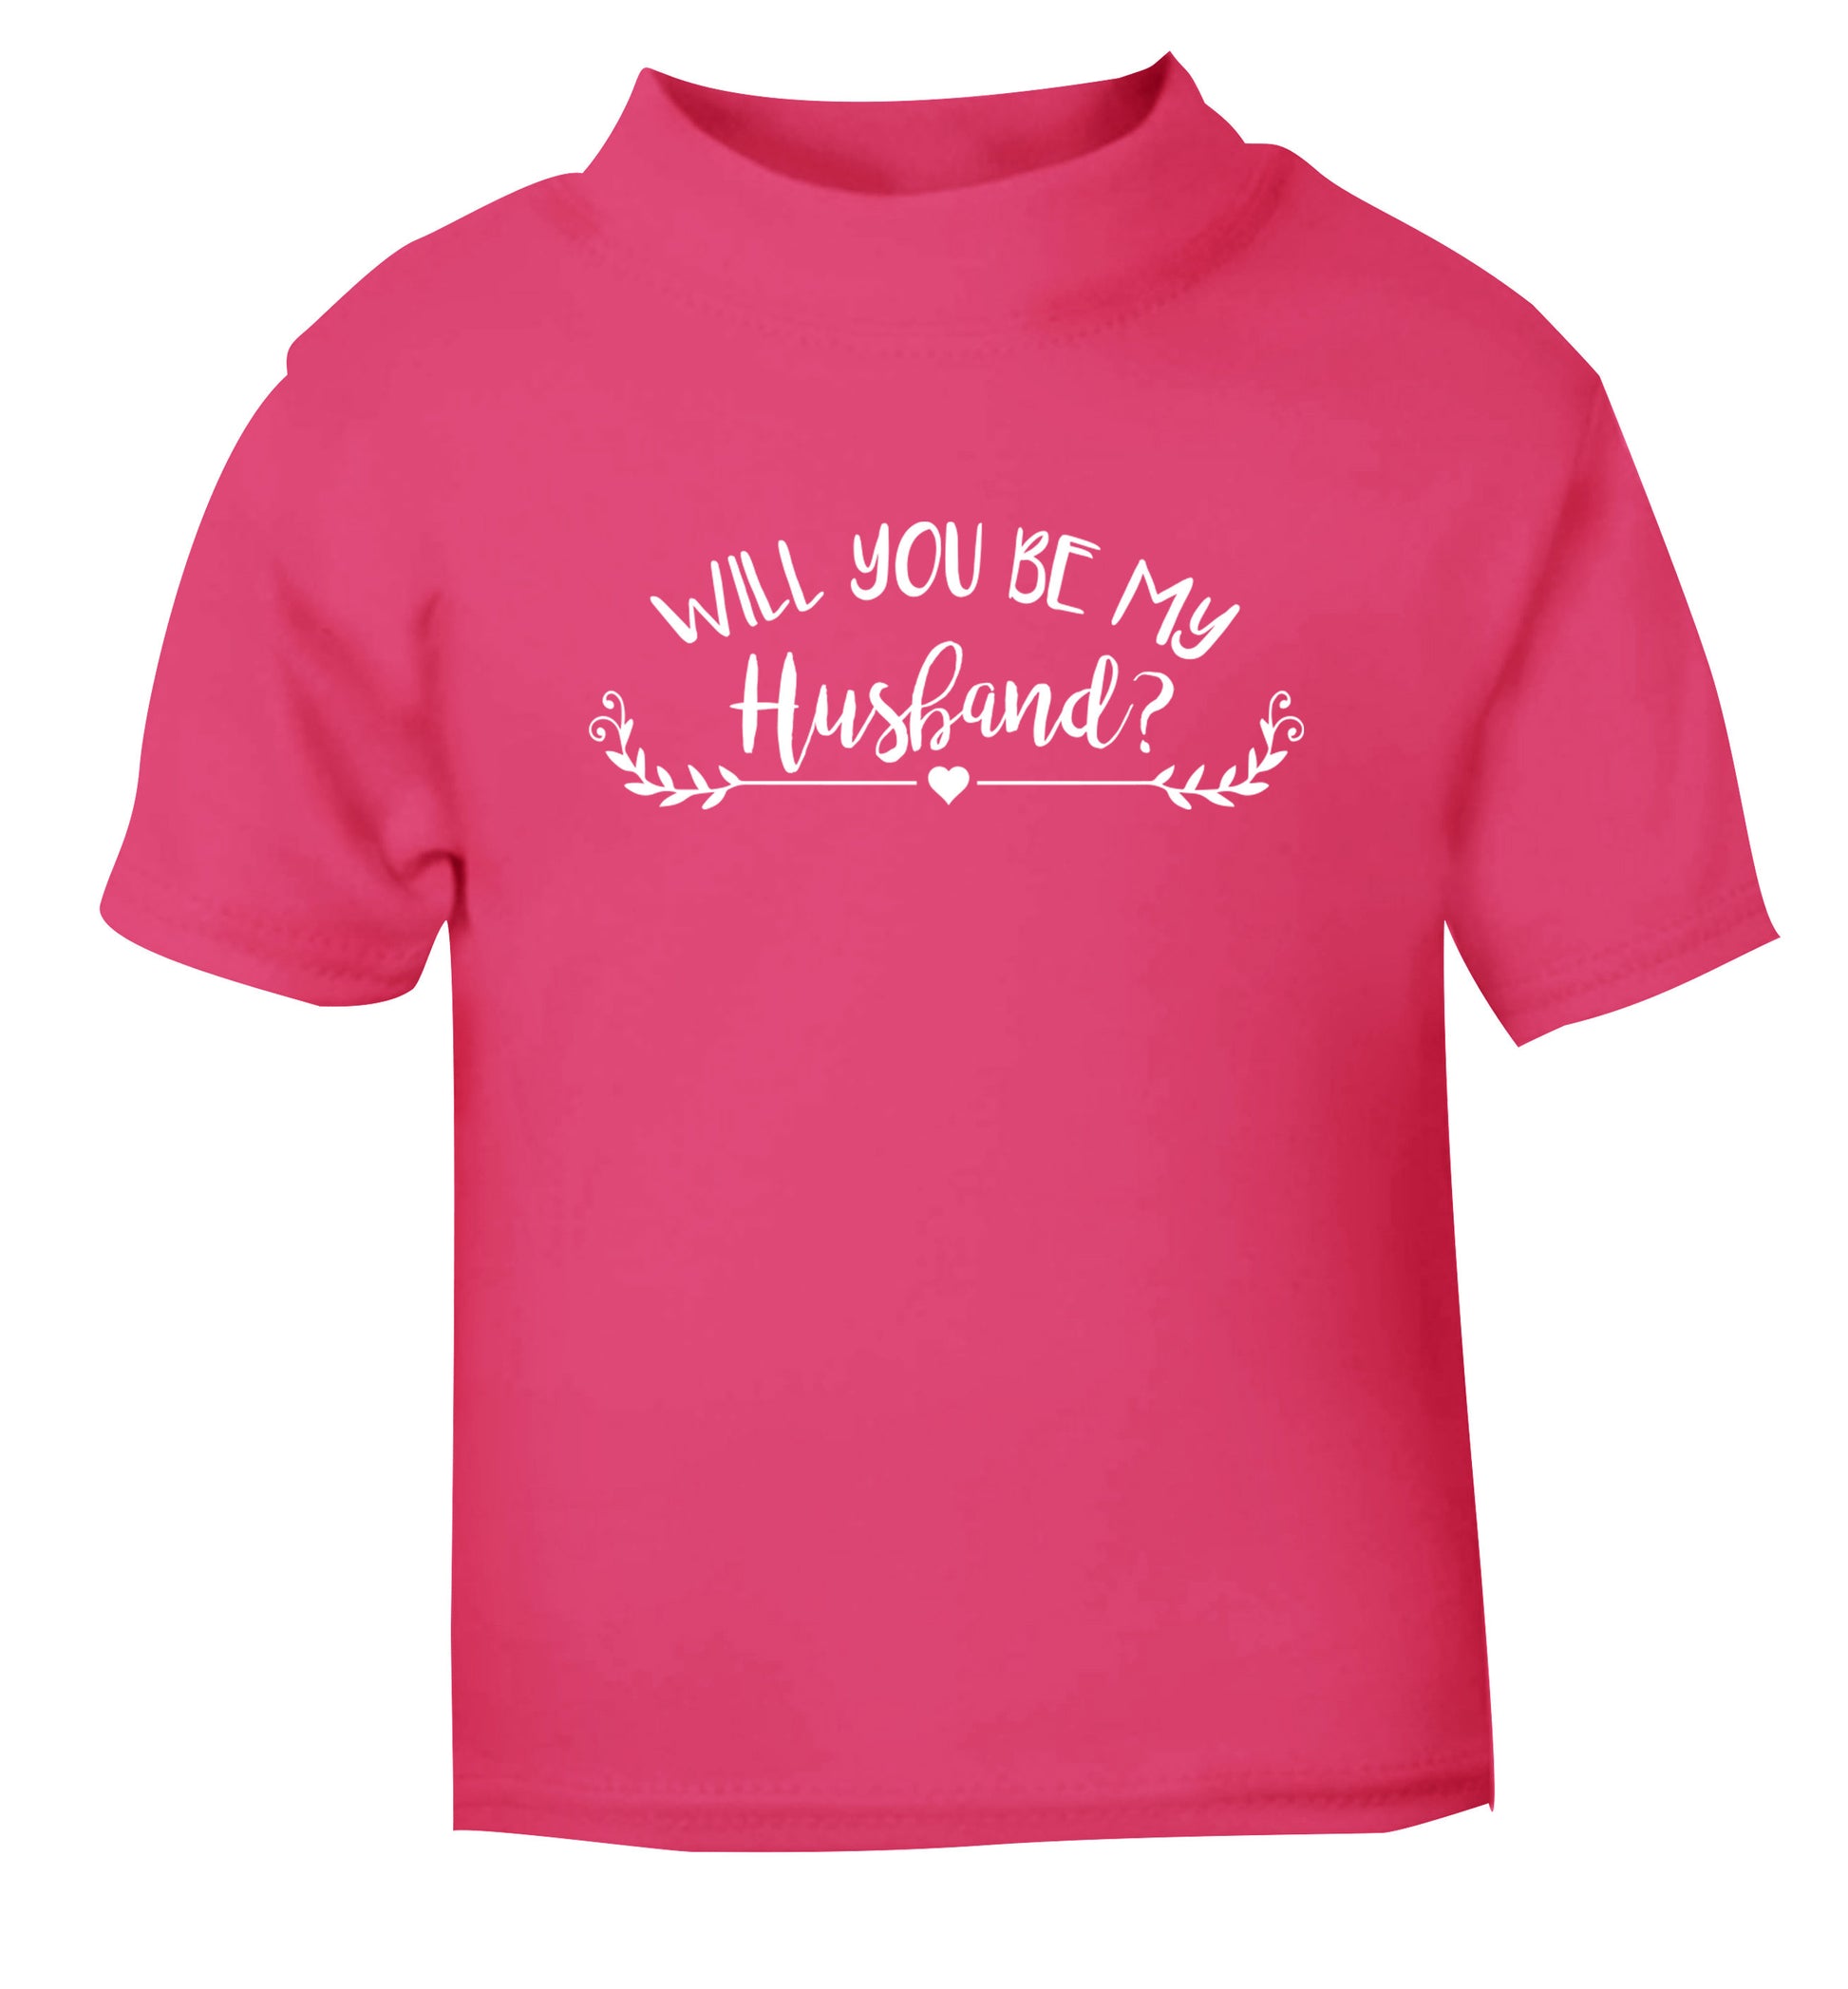 Will you be my husband? pink Baby Toddler Tshirt 2 Years